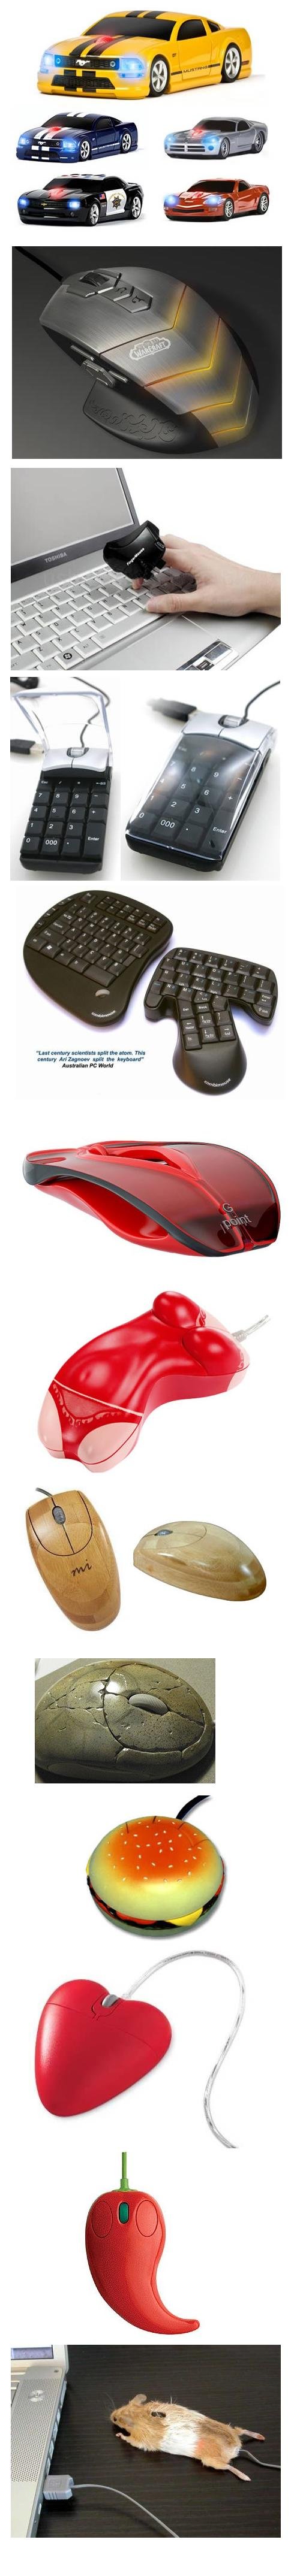 Weird/cool computer mice. Heres a collection of interesting computer mice ive found..... I've never played World of Warcraft, but the second one looks BADASS.